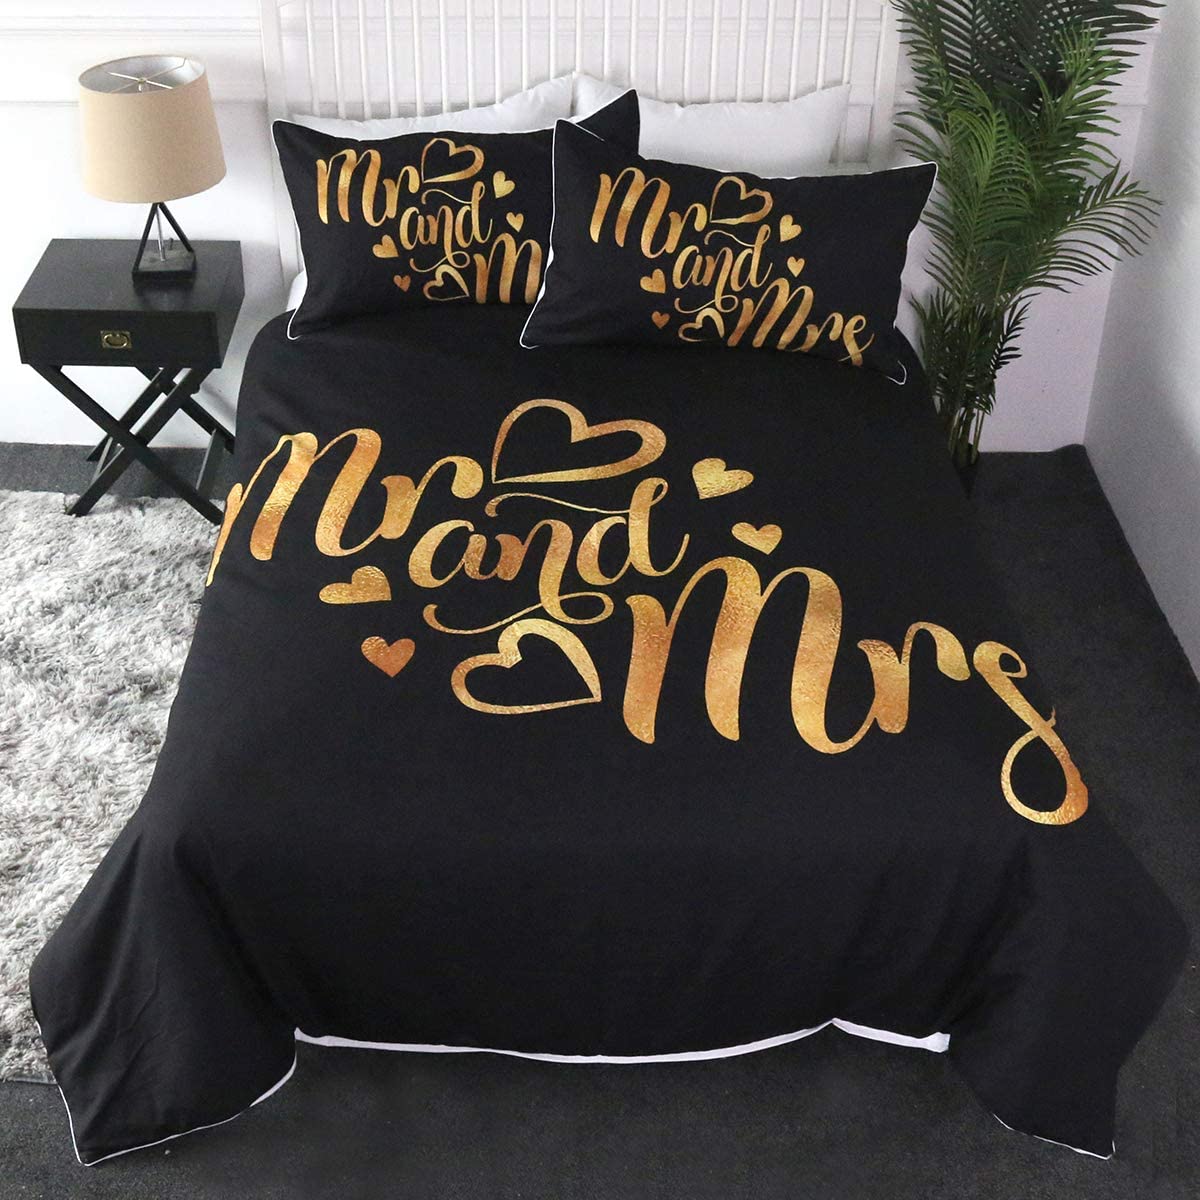 Lovers Couple Pillowcase His and Hers Pillow Cover Wedding Bedding King & Queen 